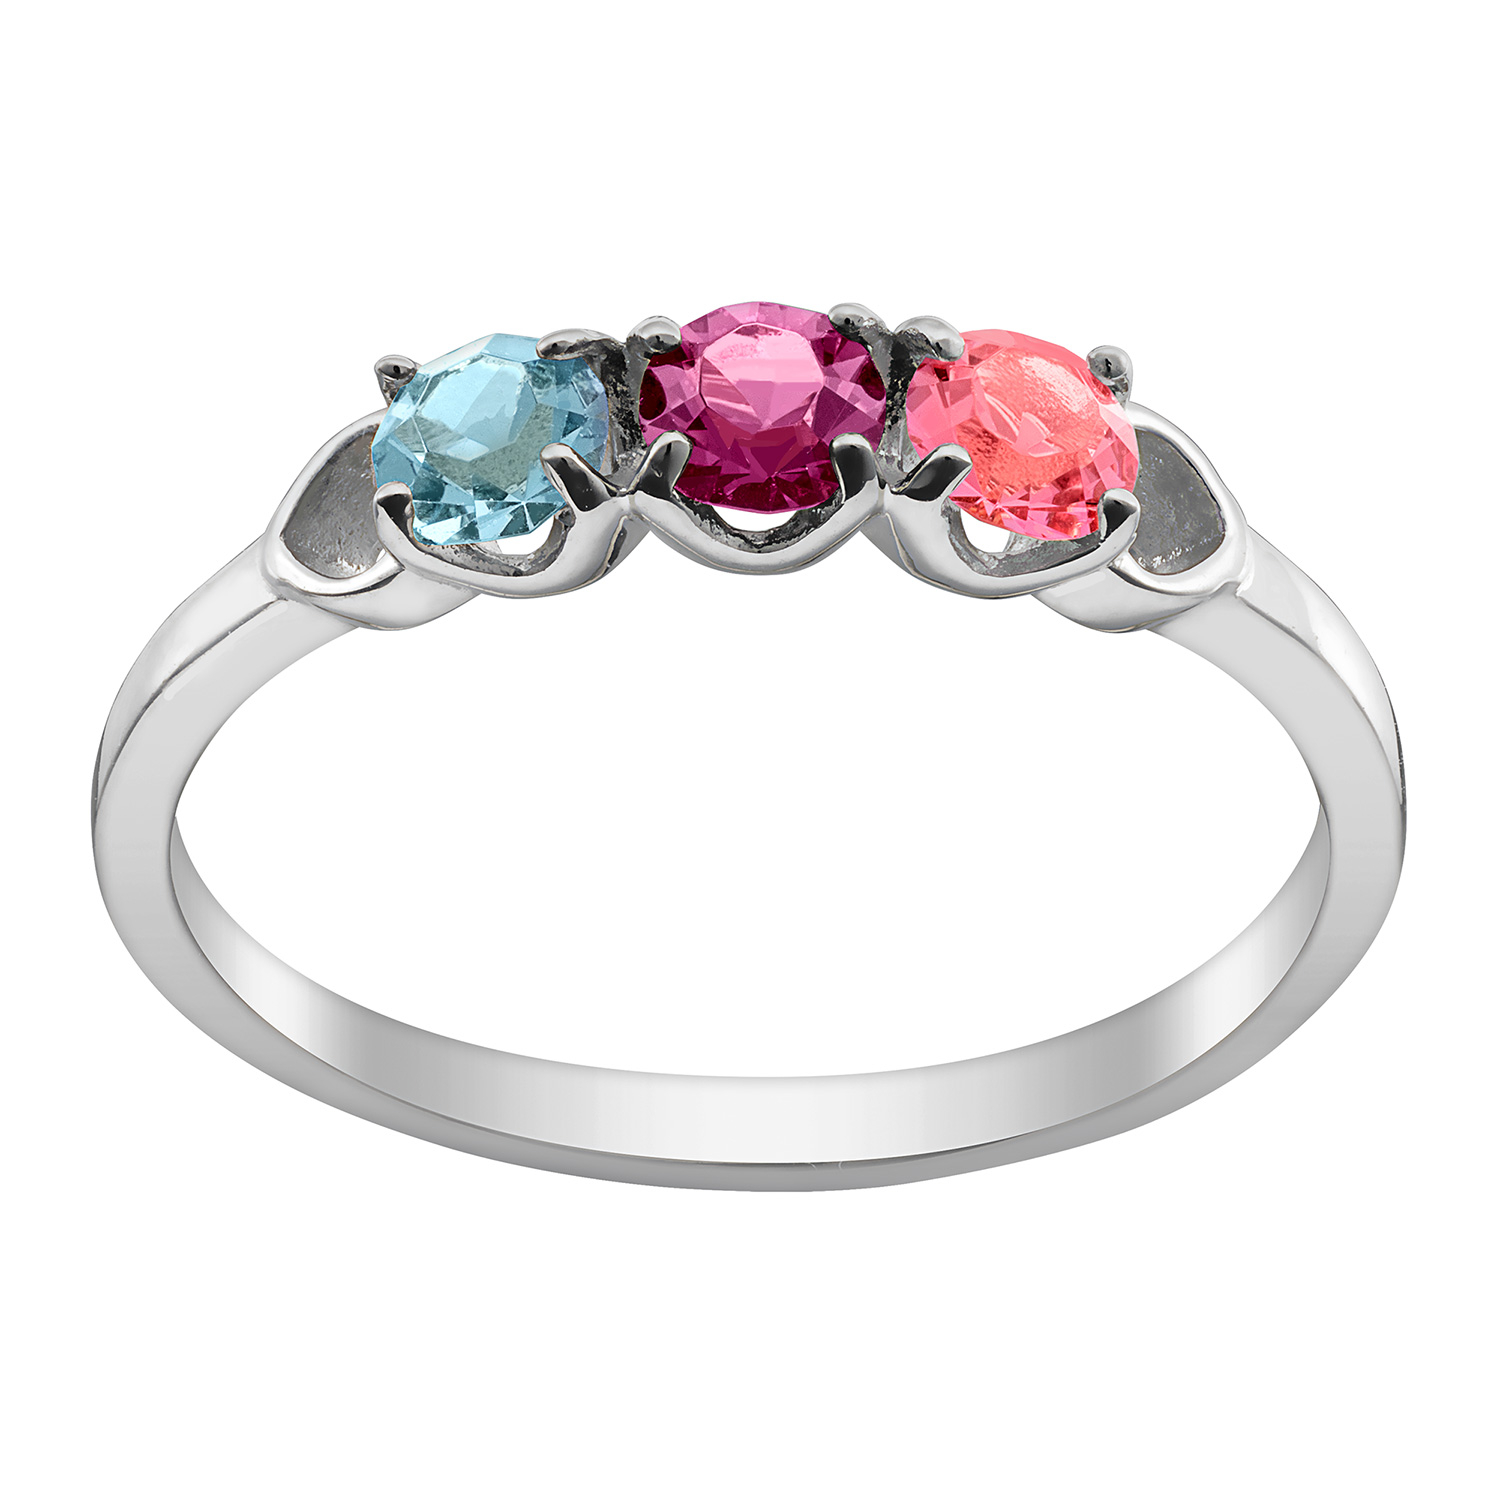 Sterling Silver Round Birthstone Ring with Hearts - 3 Stones